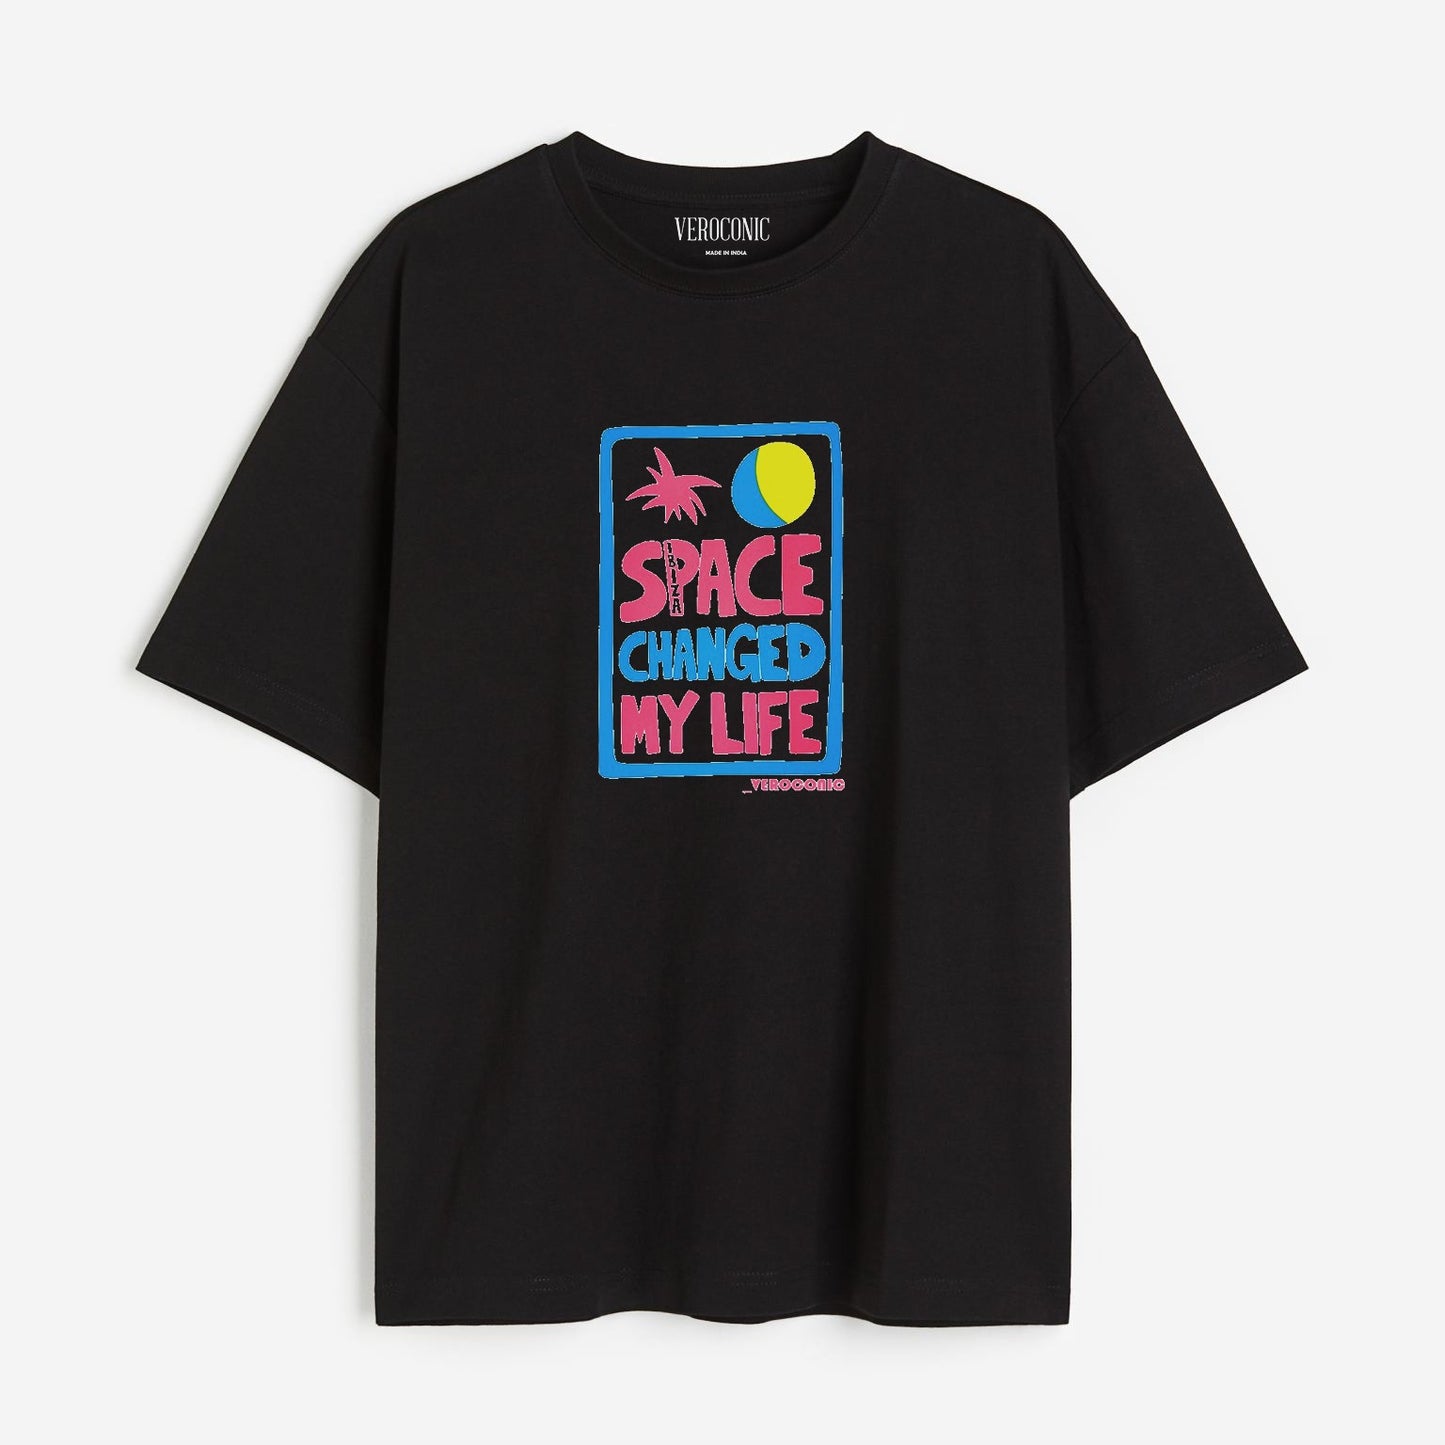 Space Changed My Life Graphic Printed Oversized Black Cotton T-shirt